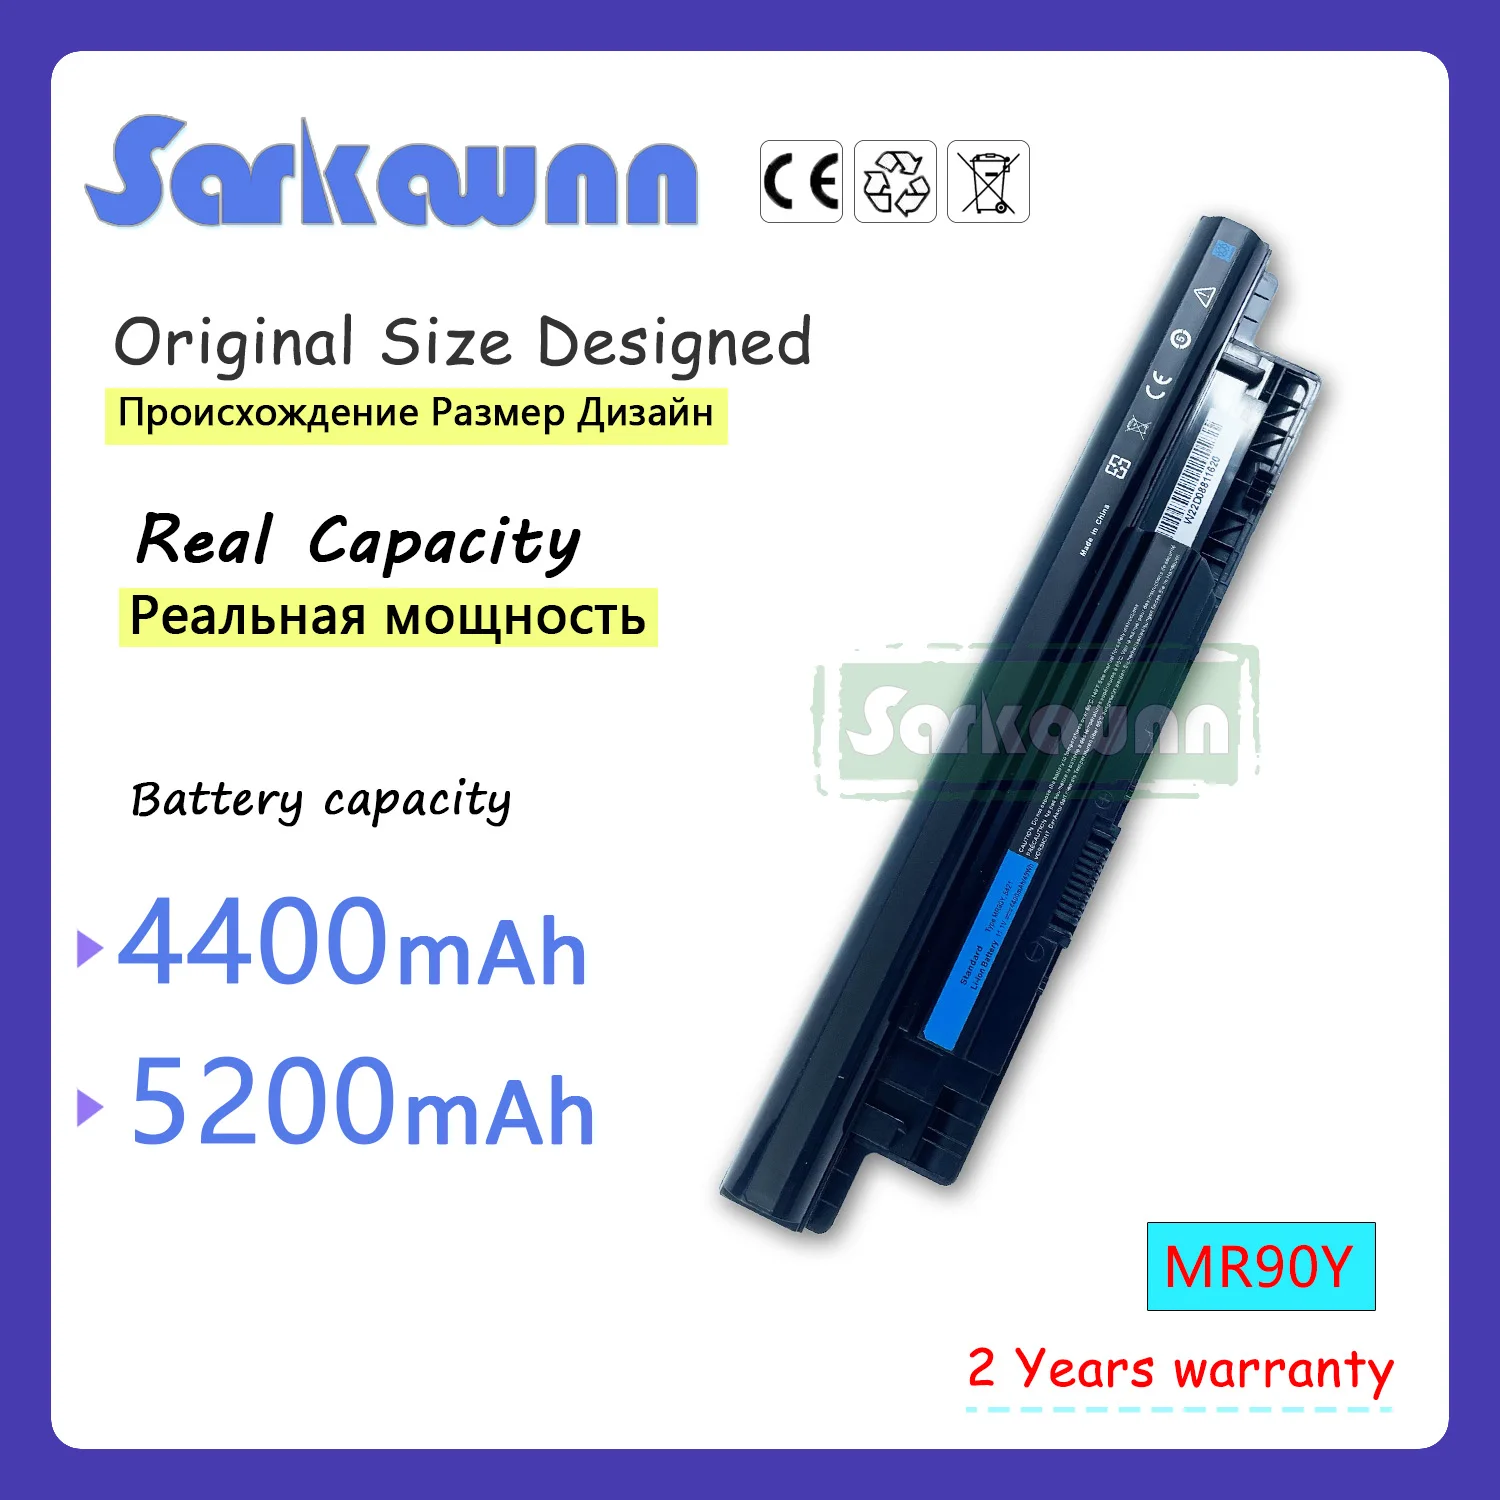 

Sarkawnn 6Cell MR90Y Battery For DELL Inspiron 14R 15R 3421 3721 5421 5521 5721 3521 3437 3537 5437 5537 3737 5737 XCMRD New